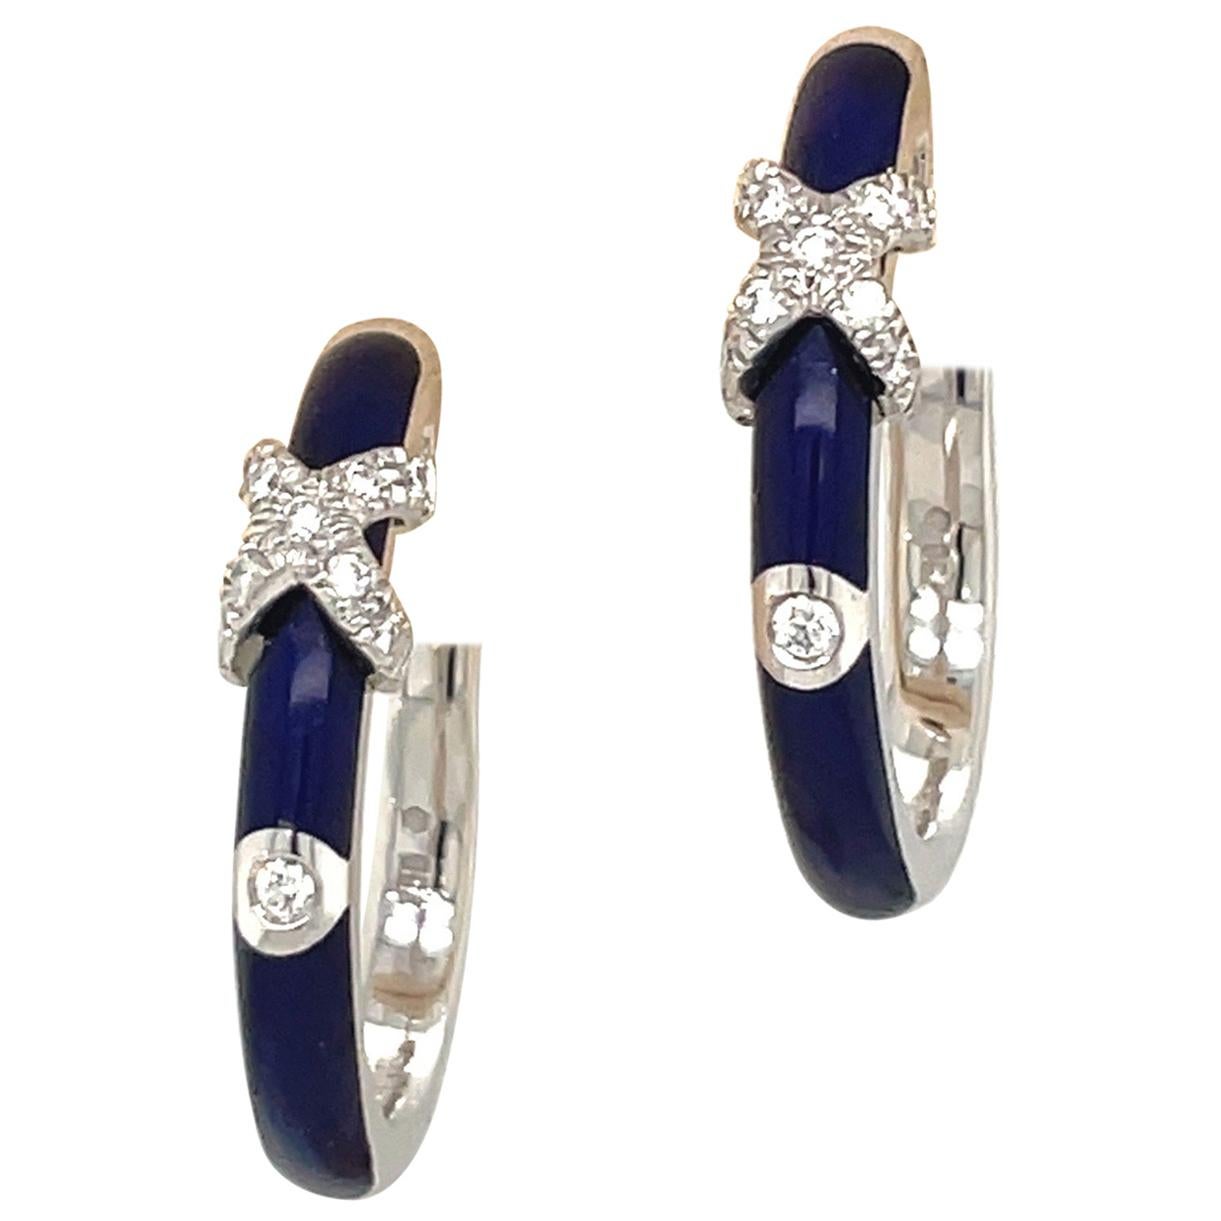 Faberge 18kt White Gold Diamond 0.22ct. and Blue Enamel Hoop Earrings #18 For Sale